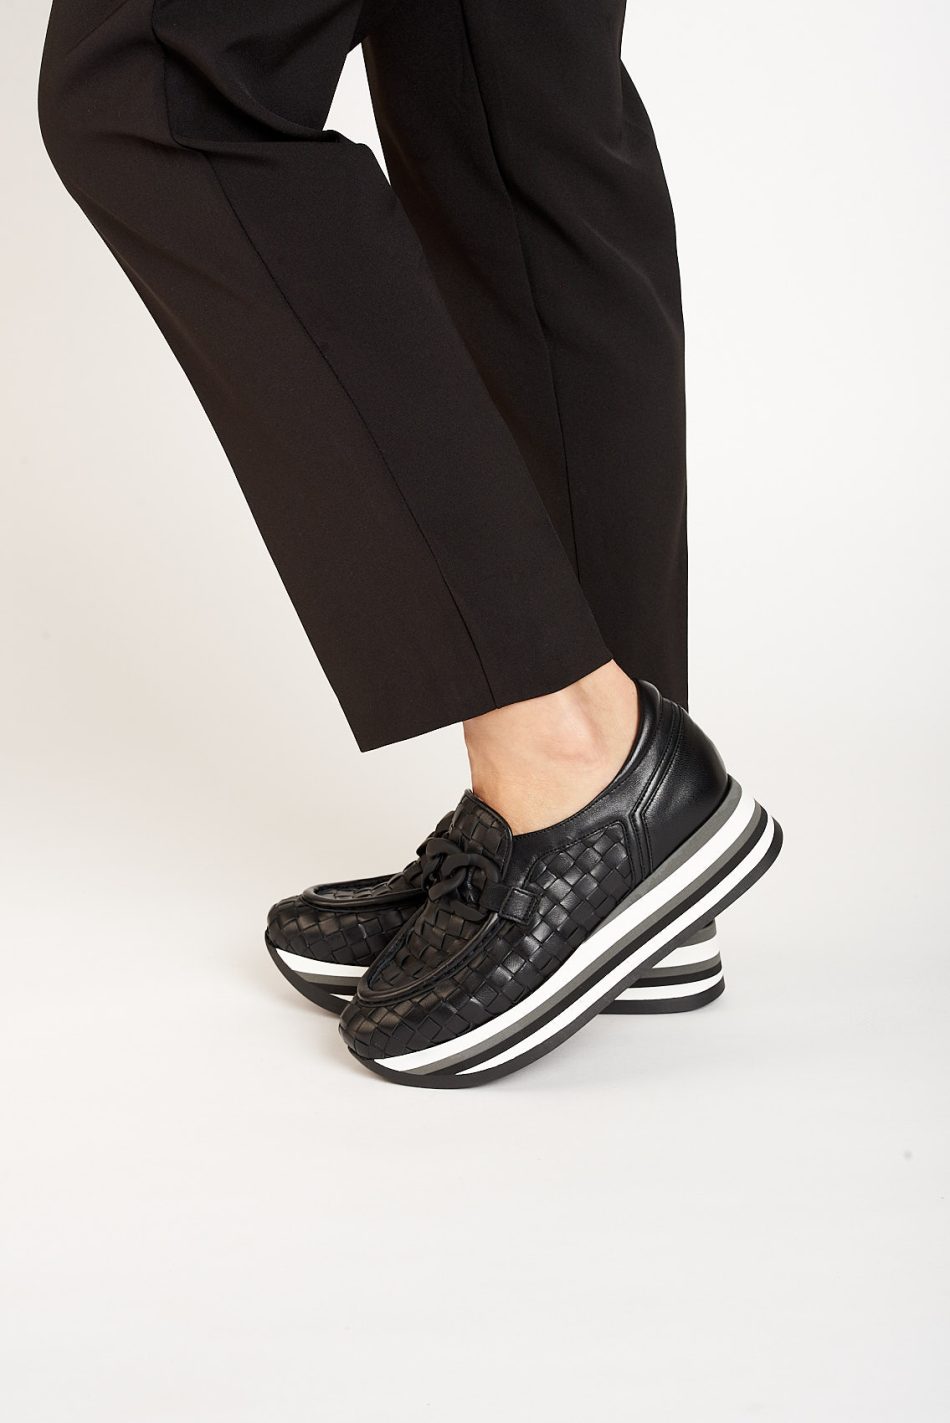 4cm platform shoe with white, black and grey stripes made entirely of leather. It is made in Suprema Black and Tressé Black. It has a Black application on the front of the shoe and the back is padded